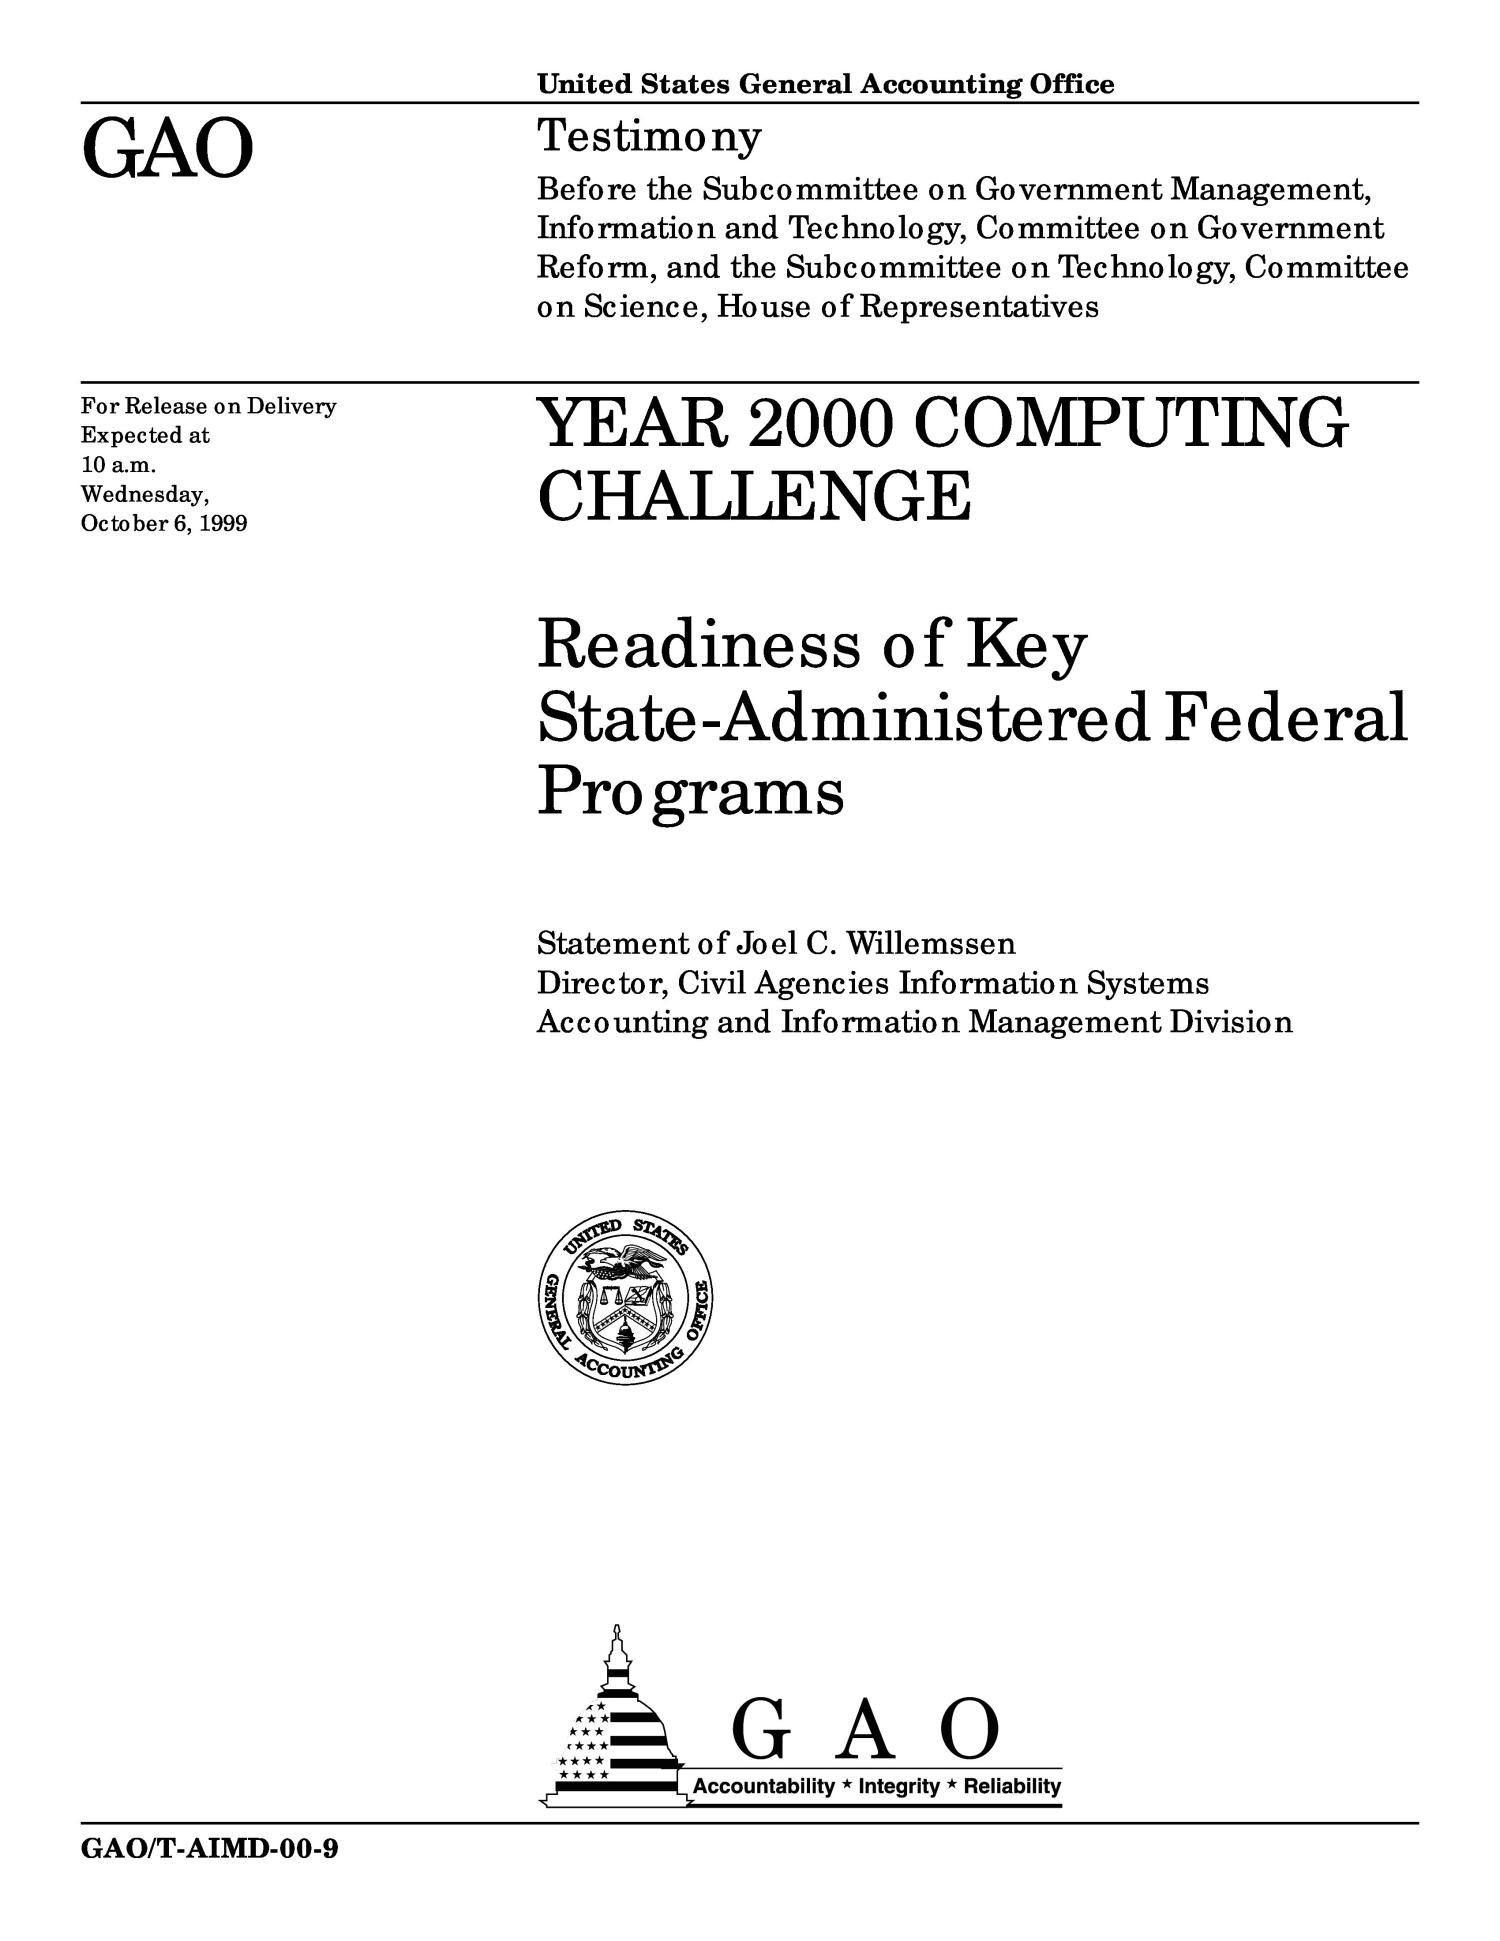 Year 2000 Computing Challenge: Readiness of Key State-Administered Federal Programs
                                                
                                                    [Sequence #]: 1 of 19
                                                